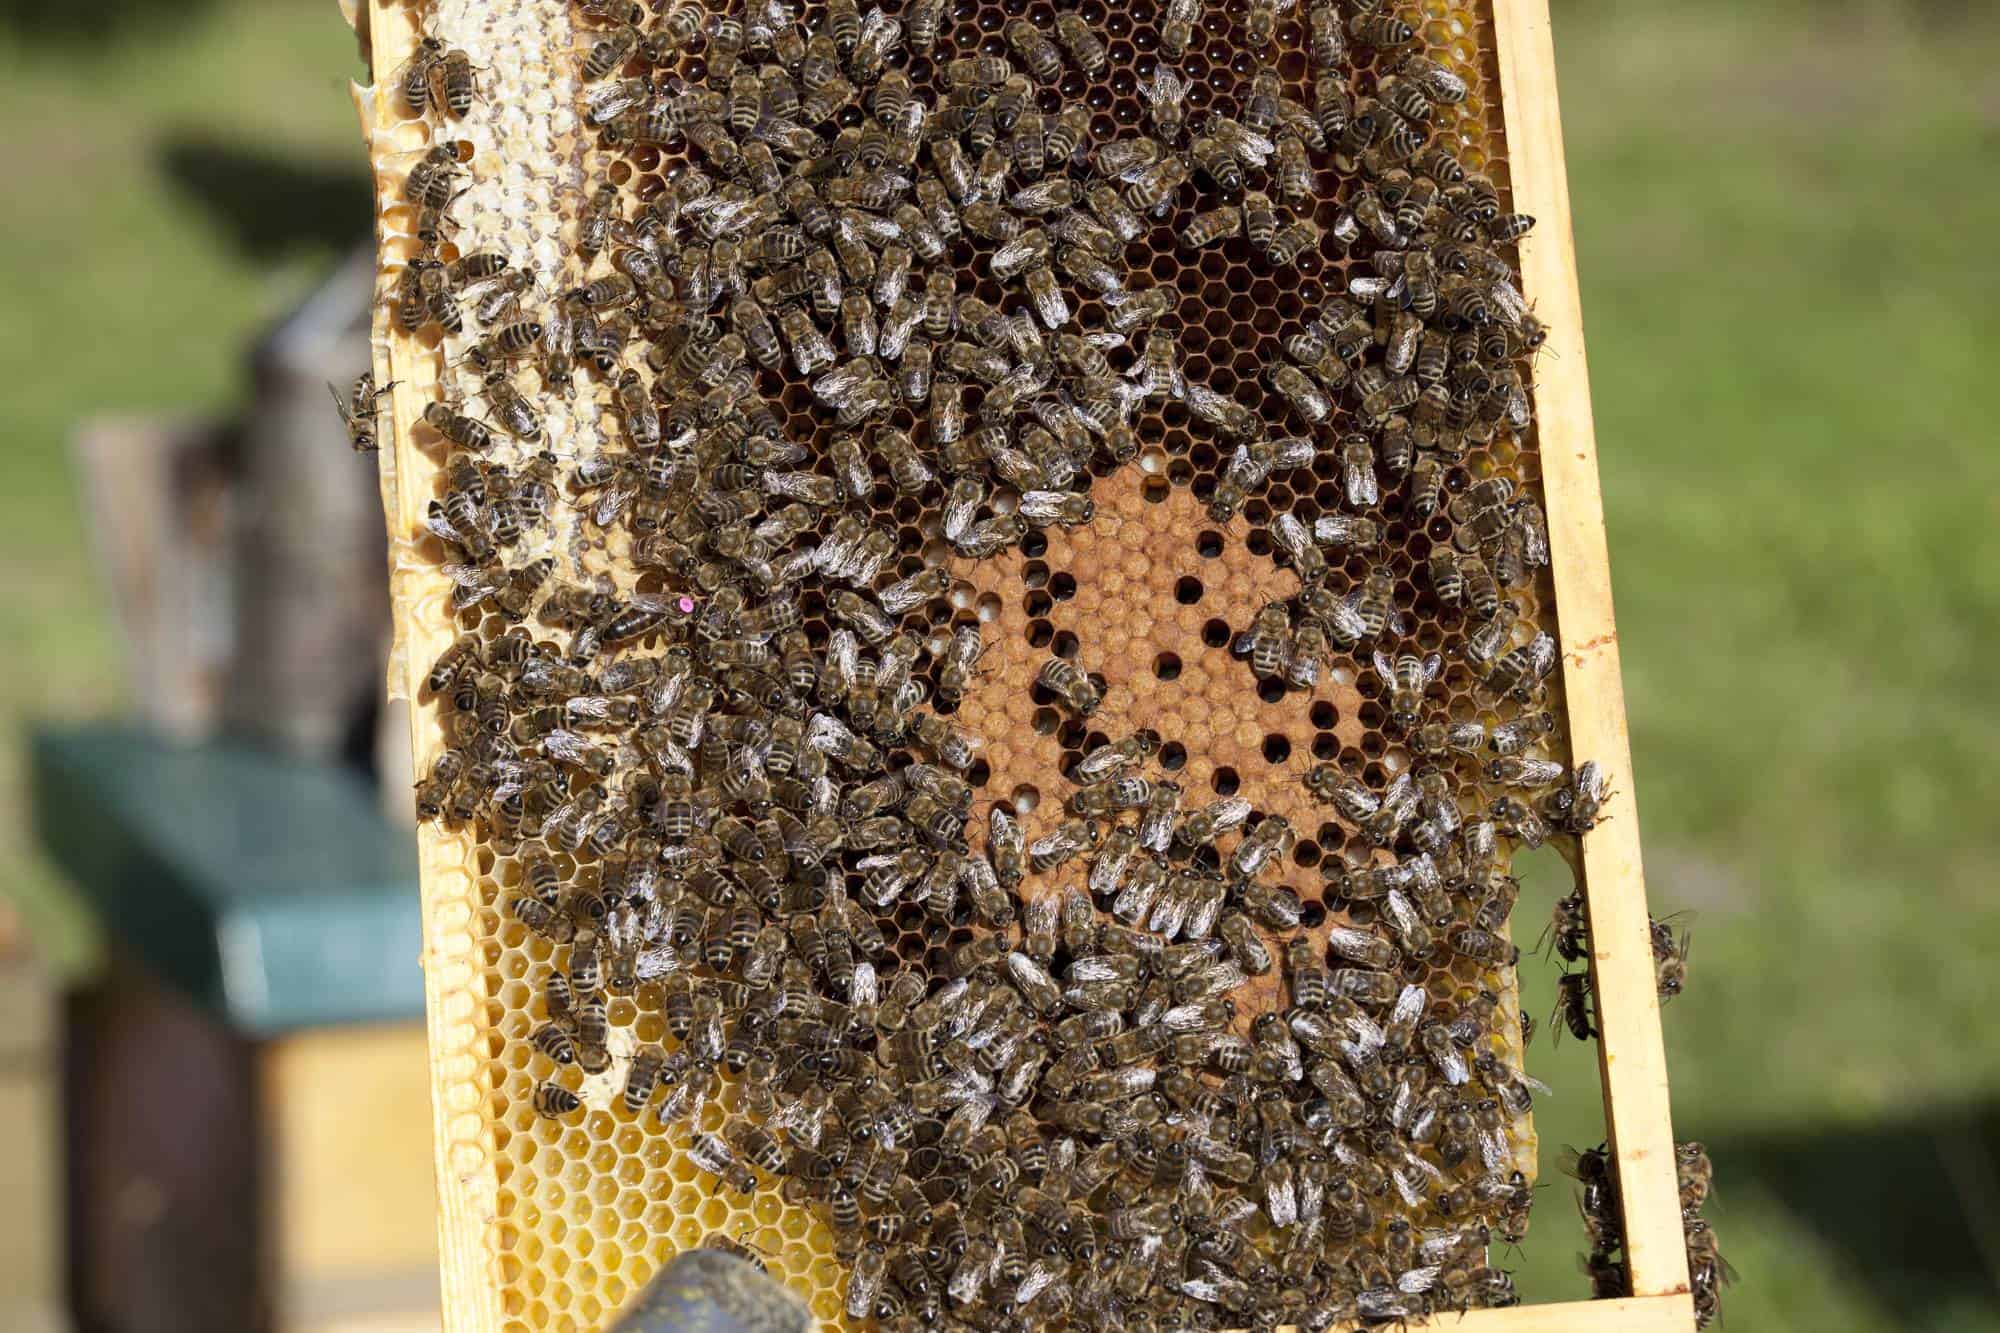 Bees Without Their Queen